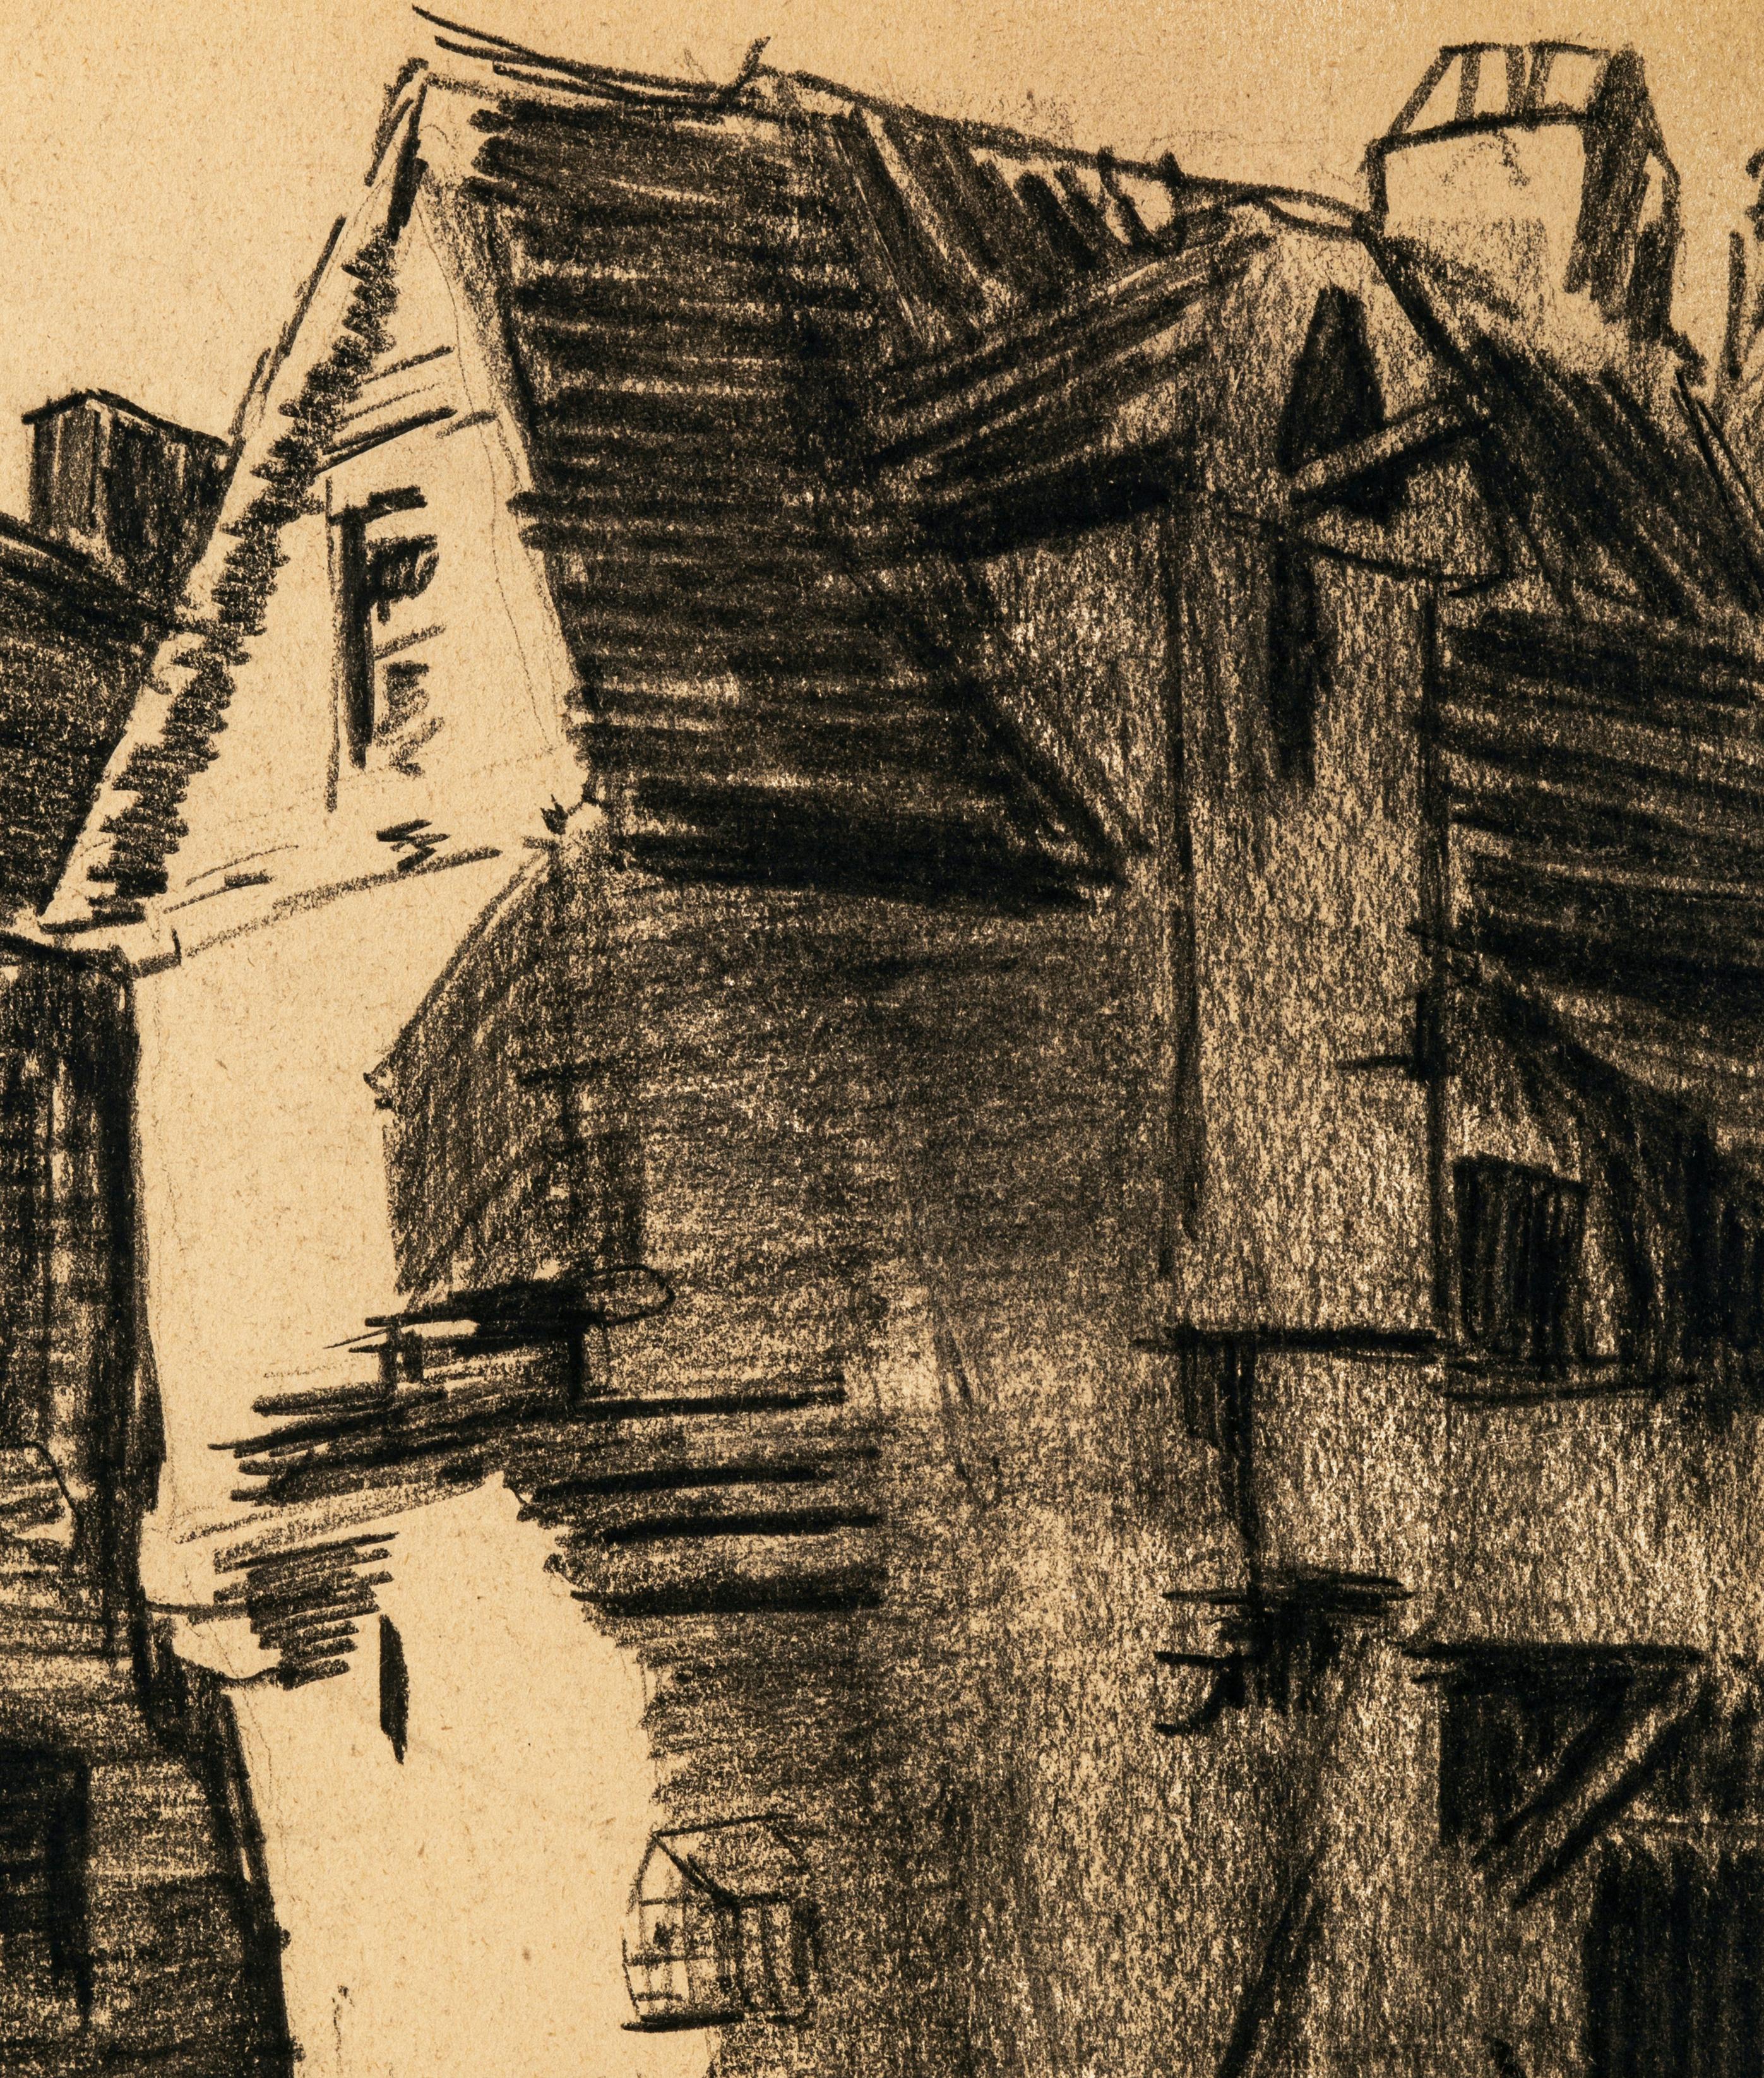 The village is a charcoal drawing realized by Jean Chapin in the early XX century. 

Signature stamp of the artist on the lower right margin. The drawing is detached from a notebook.

The artwork represents a view of a village. 

Good